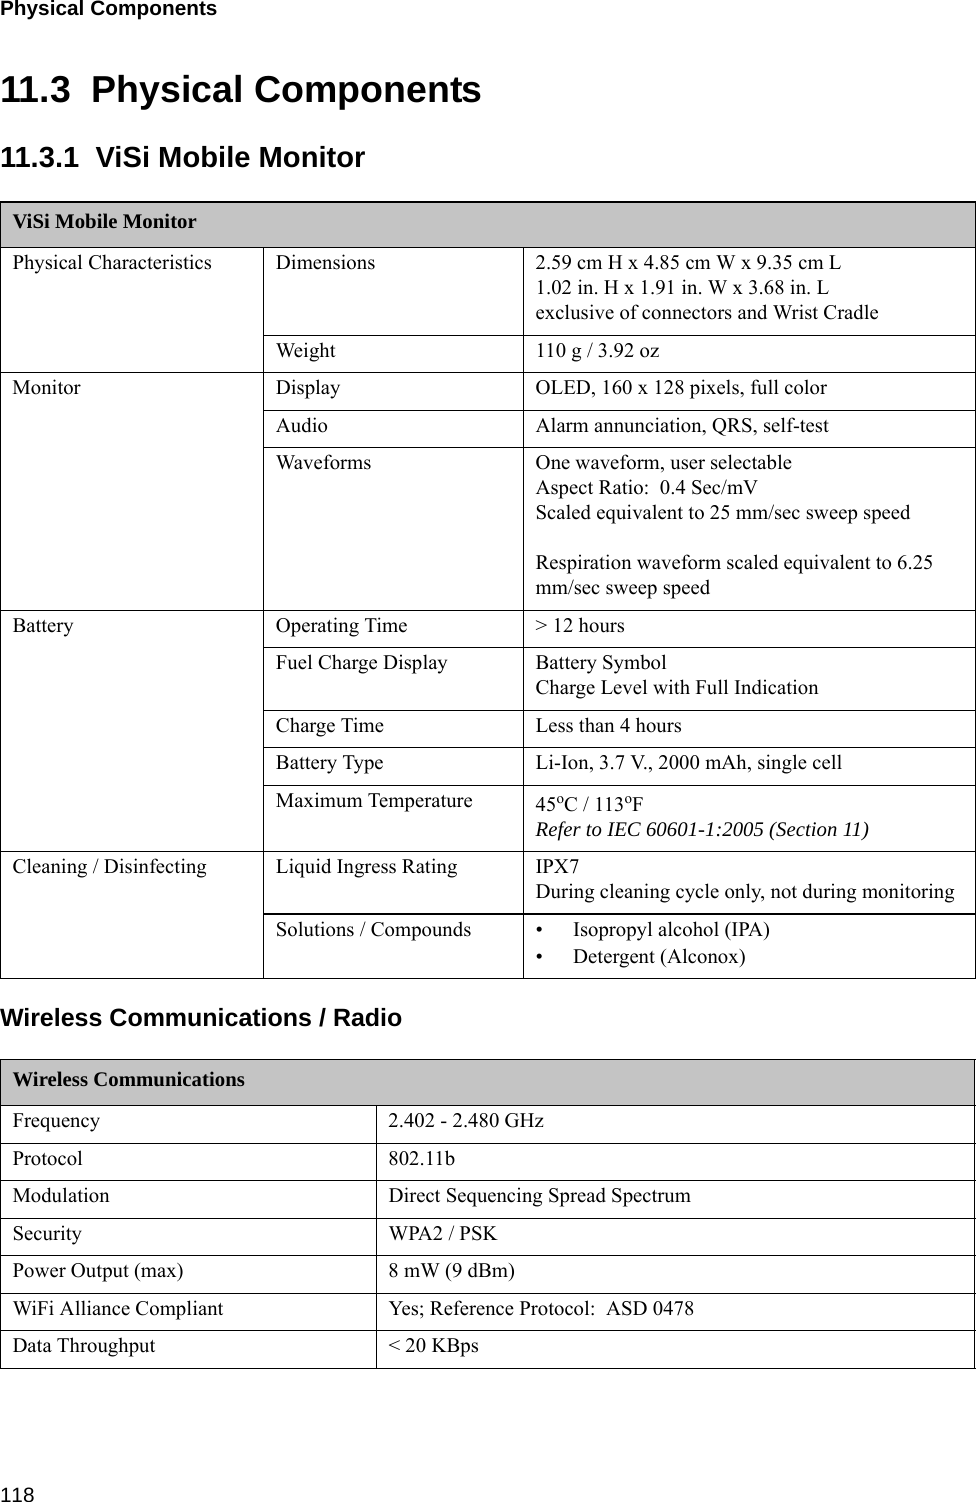 Physical Components 11811.3  Physical Components11.3.1  ViSi Mobile MonitorWireless Communications / RadioViSi Mobile MonitorPhysical Characteristics Dimensions 2.59 cm H x 4.85 cm W x 9.35 cm L 1.02 in. H x 1.91 in. W x 3.68 in. Lexclusive of connectors and Wrist CradleWeight 110 g / 3.92 ozMonitor Display OLED, 160 x 128 pixels, full colorAudio Alarm annunciation, QRS, self-testWaveforms One waveform, user selectableAspect Ratio:  0.4 Sec/mVScaled equivalent to 25 mm/sec sweep speedRespiration waveform scaled equivalent to 6.25 mm/sec sweep speedBattery Operating Time &gt; 12 hoursFuel Charge Display Battery SymbolCharge Level with Full IndicationCharge Time Less than 4 hoursBattery Type Li-Ion, 3.7 V., 2000 mAh, single cellMaximum Temperature 45oC / 113oF Refer to IEC 60601-1:2005 (Section 11)Cleaning / Disinfecting Liquid Ingress Rating IPX7During cleaning cycle only, not during monitoringSolutions / Compounds • Isopropyl alcohol (IPA)• Detergent (Alconox)Wireless CommunicationsFrequency 2.402 - 2.480 GHzProtocol 802.11bModulation Direct Sequencing Spread SpectrumSecurity WPA2 / PSKPower Output (max) 8 mW (9 dBm)WiFi Alliance Compliant Yes; Reference Protocol:  ASD 0478Data Throughput &lt; 20 KBps